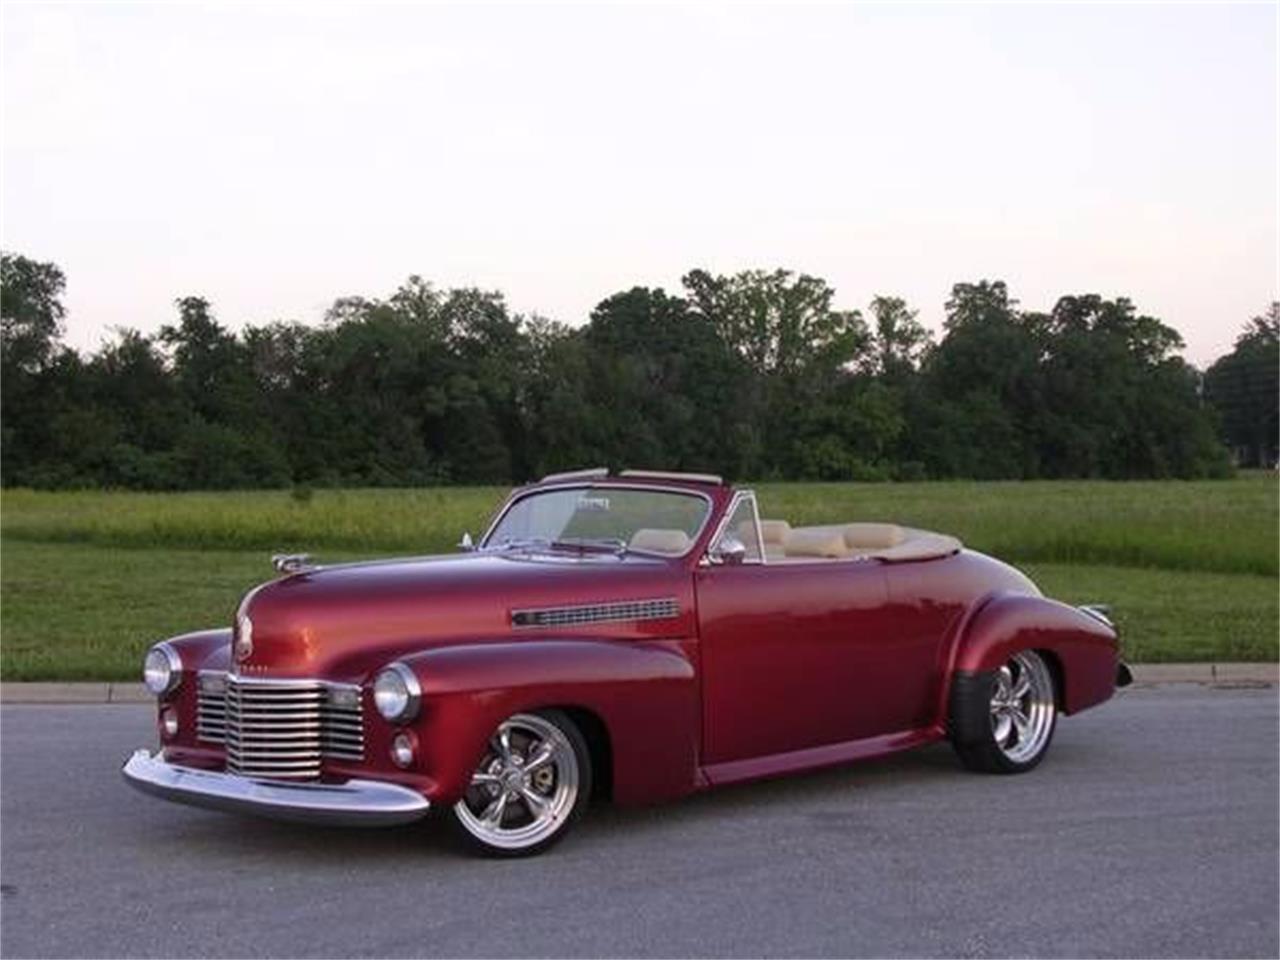 1941 Cadillac Convertible for Sale | ClassicCars.com | CC ...